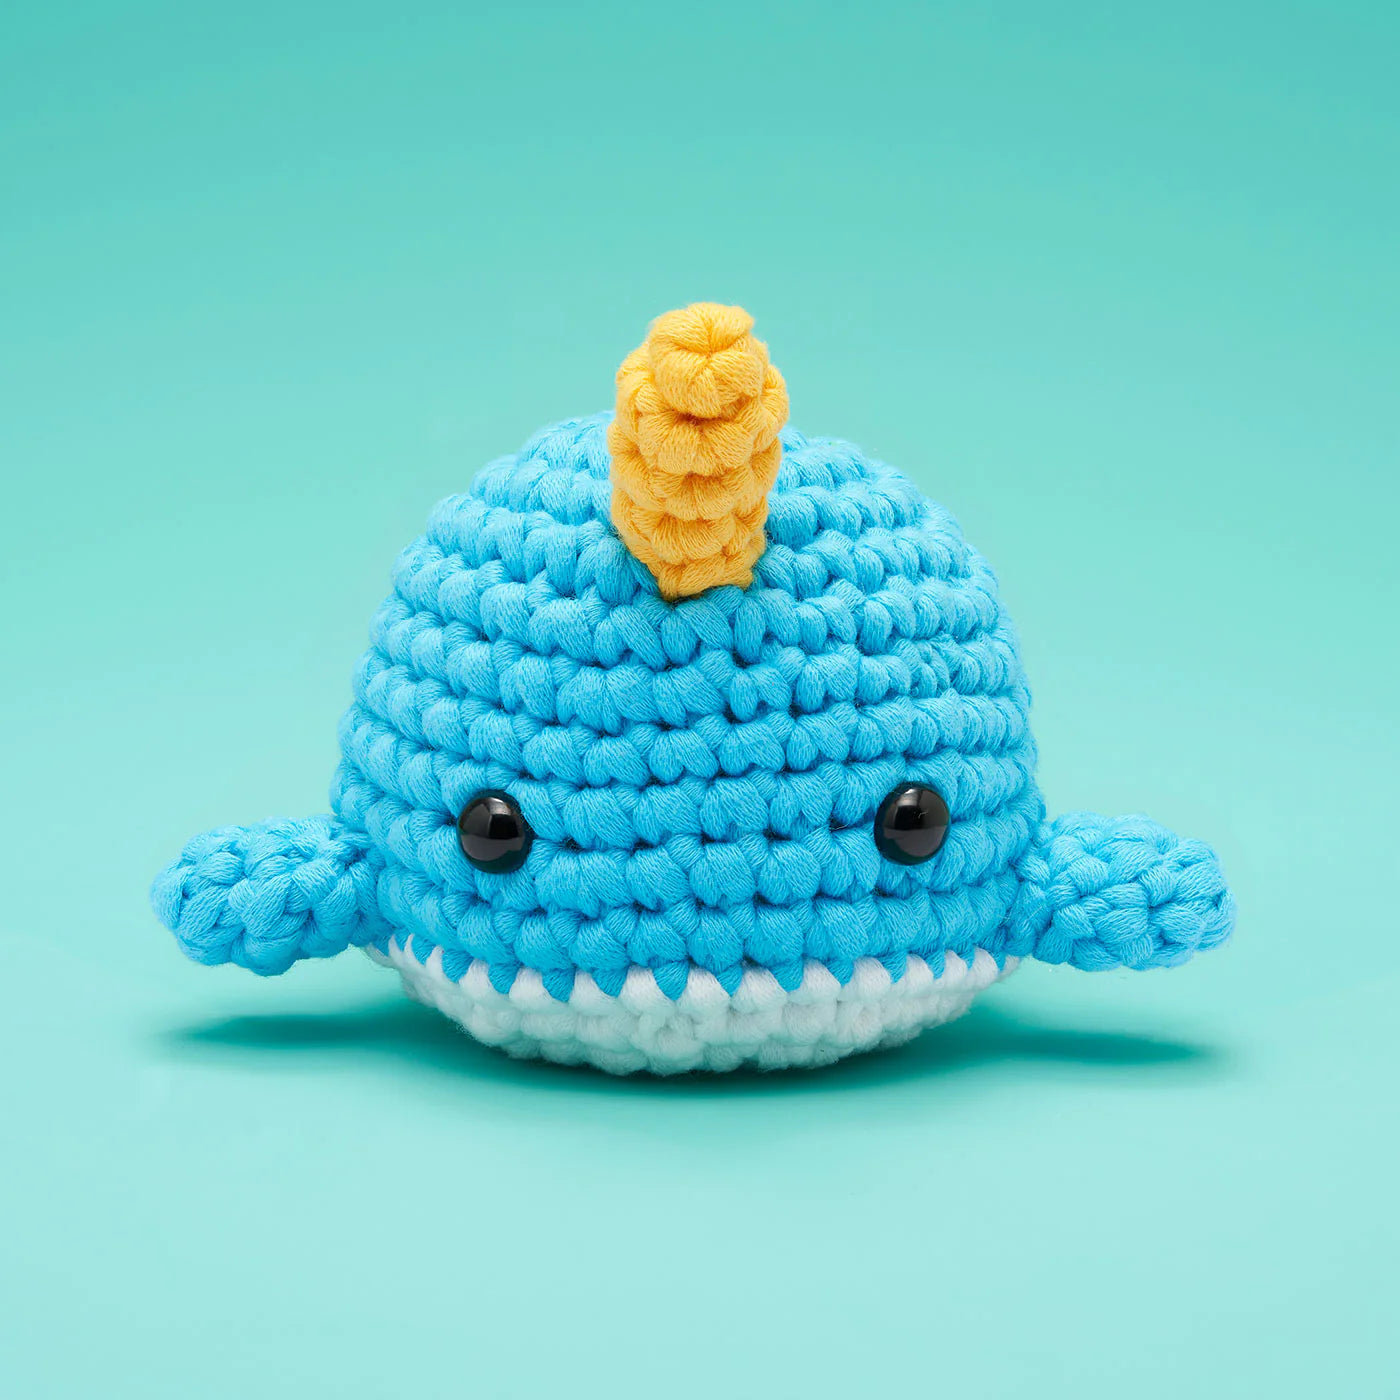 The Woobles: Crochet Kits Perfect For This Halloween